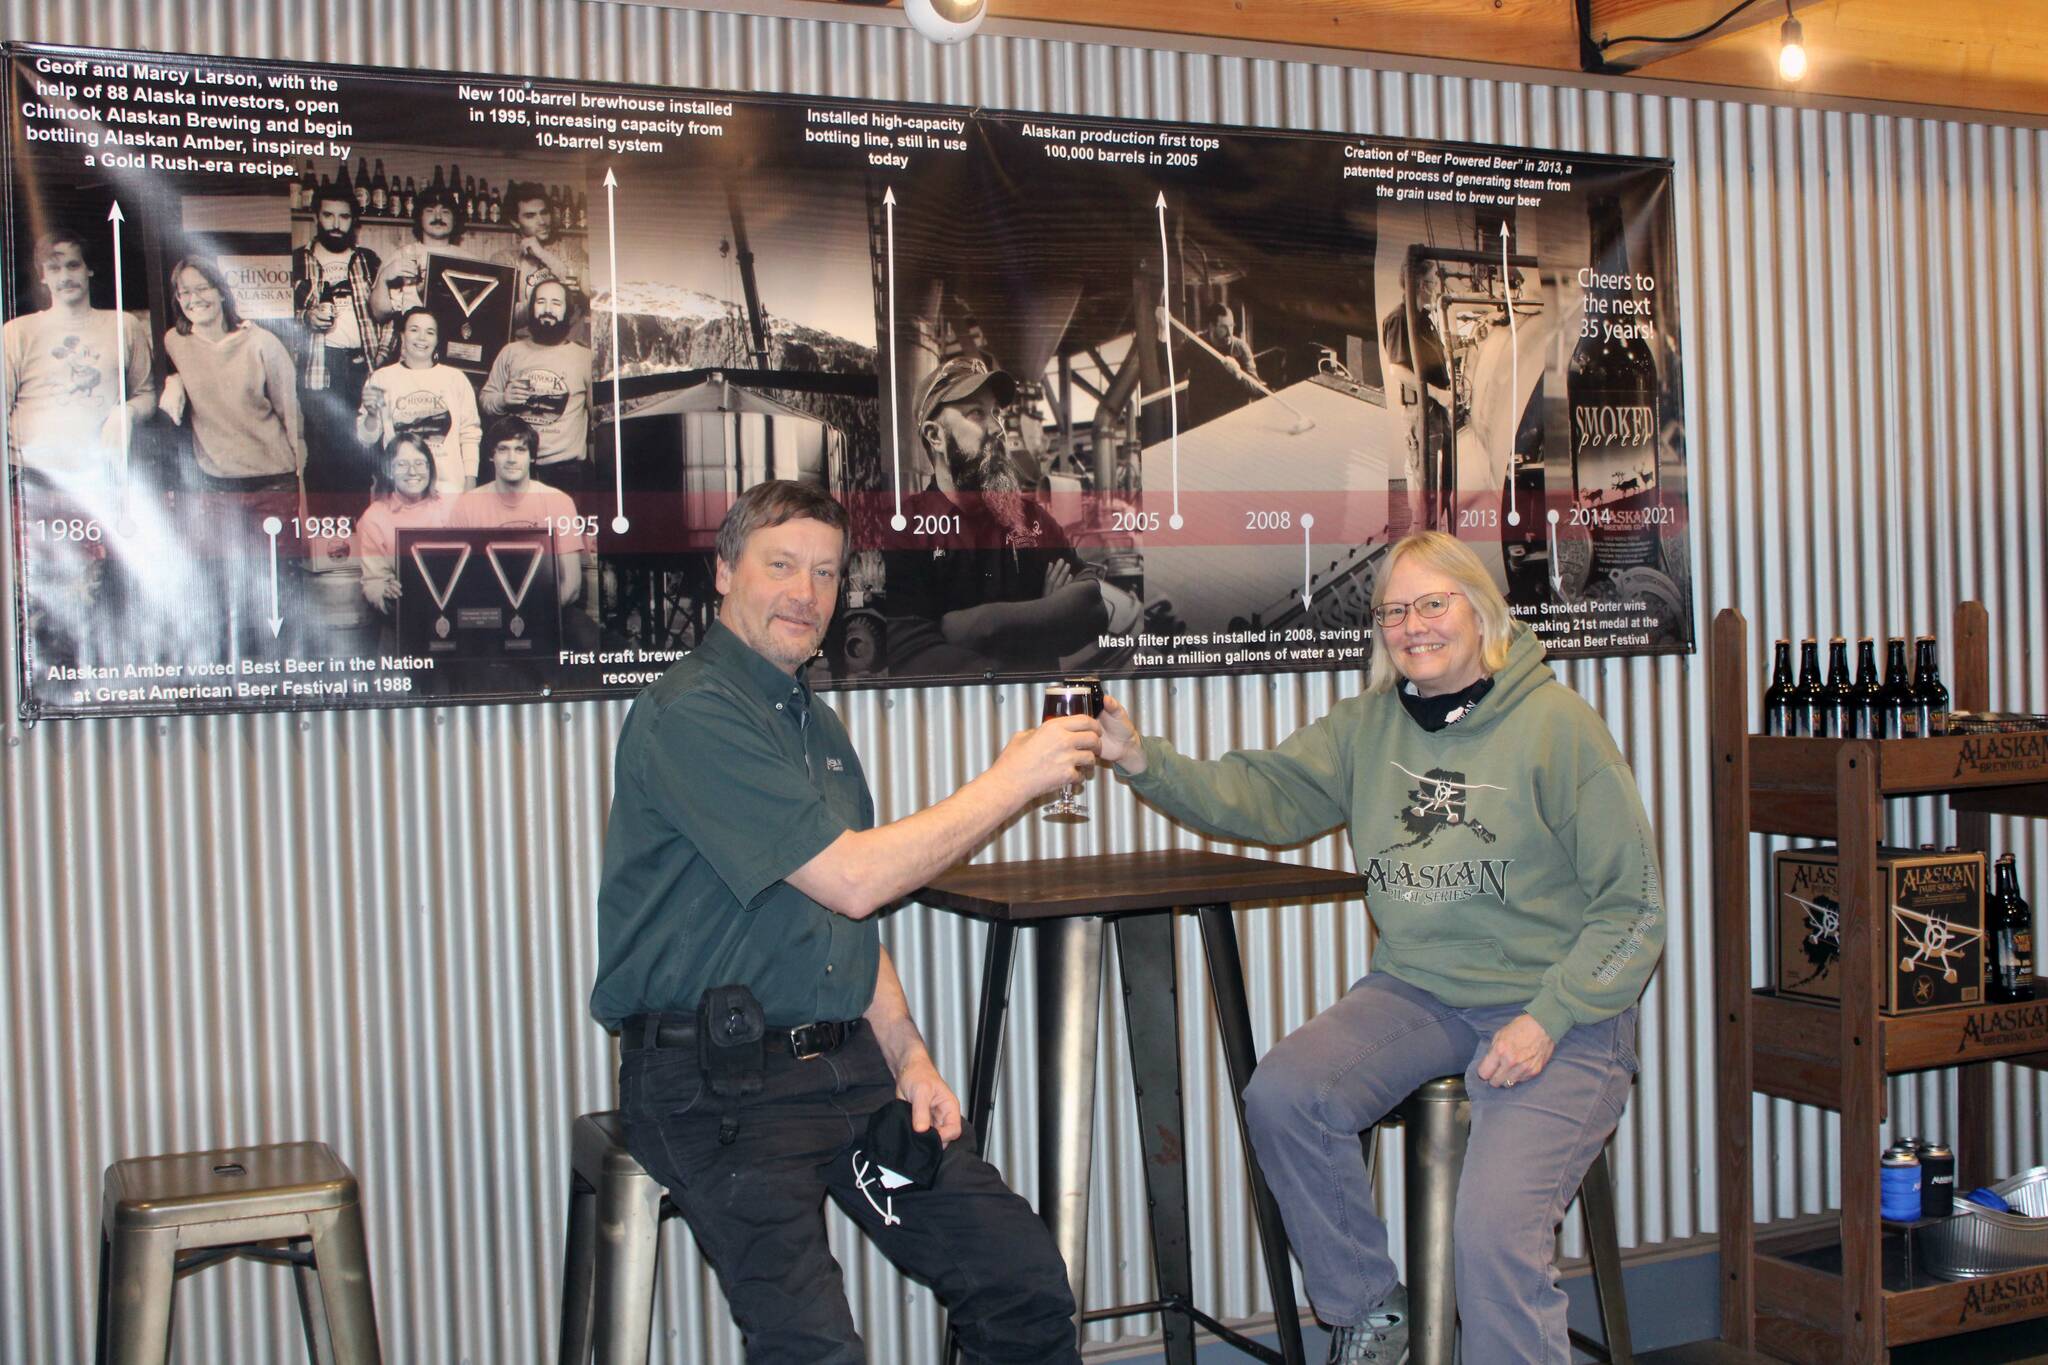 Dana Zigmund / Juneau Empire
Geoff and Marcy Larson toast to 35 years of brewing in the Alaskan Brewing Co. Tap Room on Feb. 4. A timeline of business milestones hangs behind them.